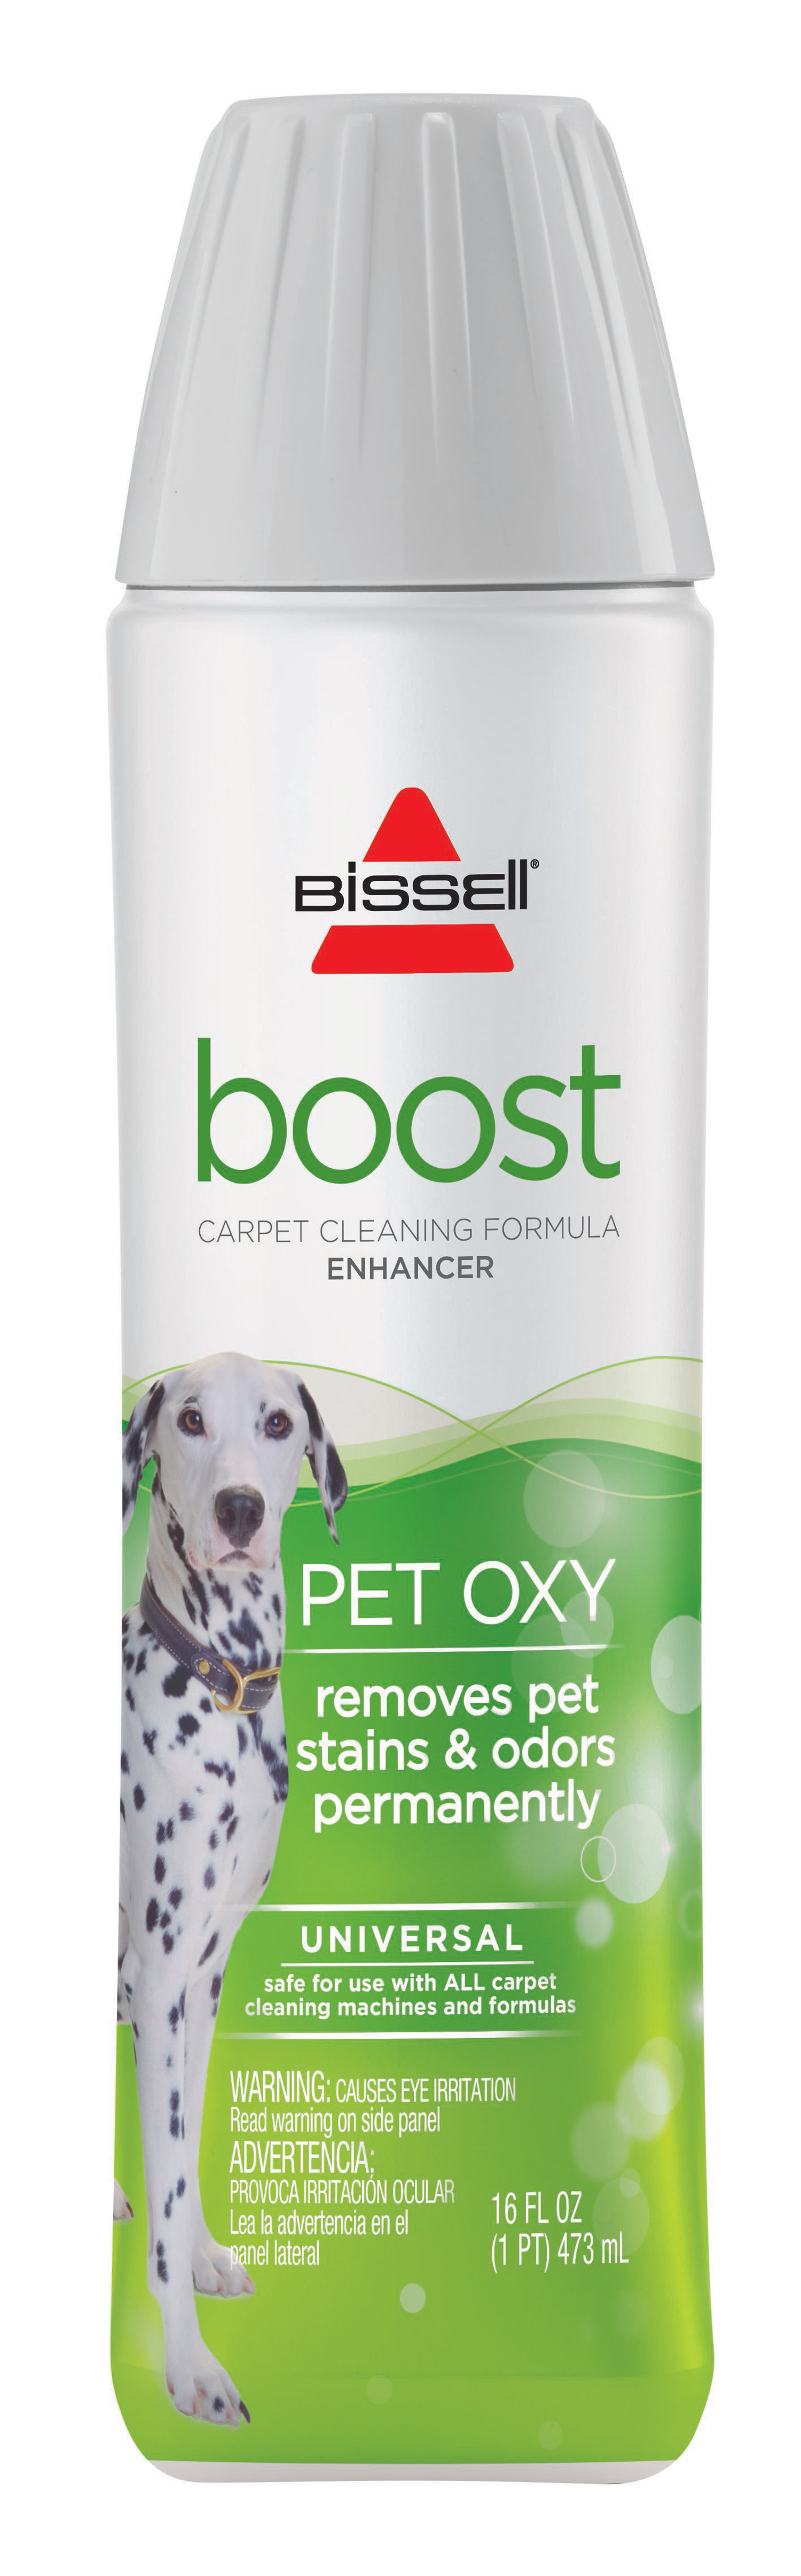 BISSELL Oxy BOOST 16oz. Enhancing Carpet & Upholstery Formula - 14051